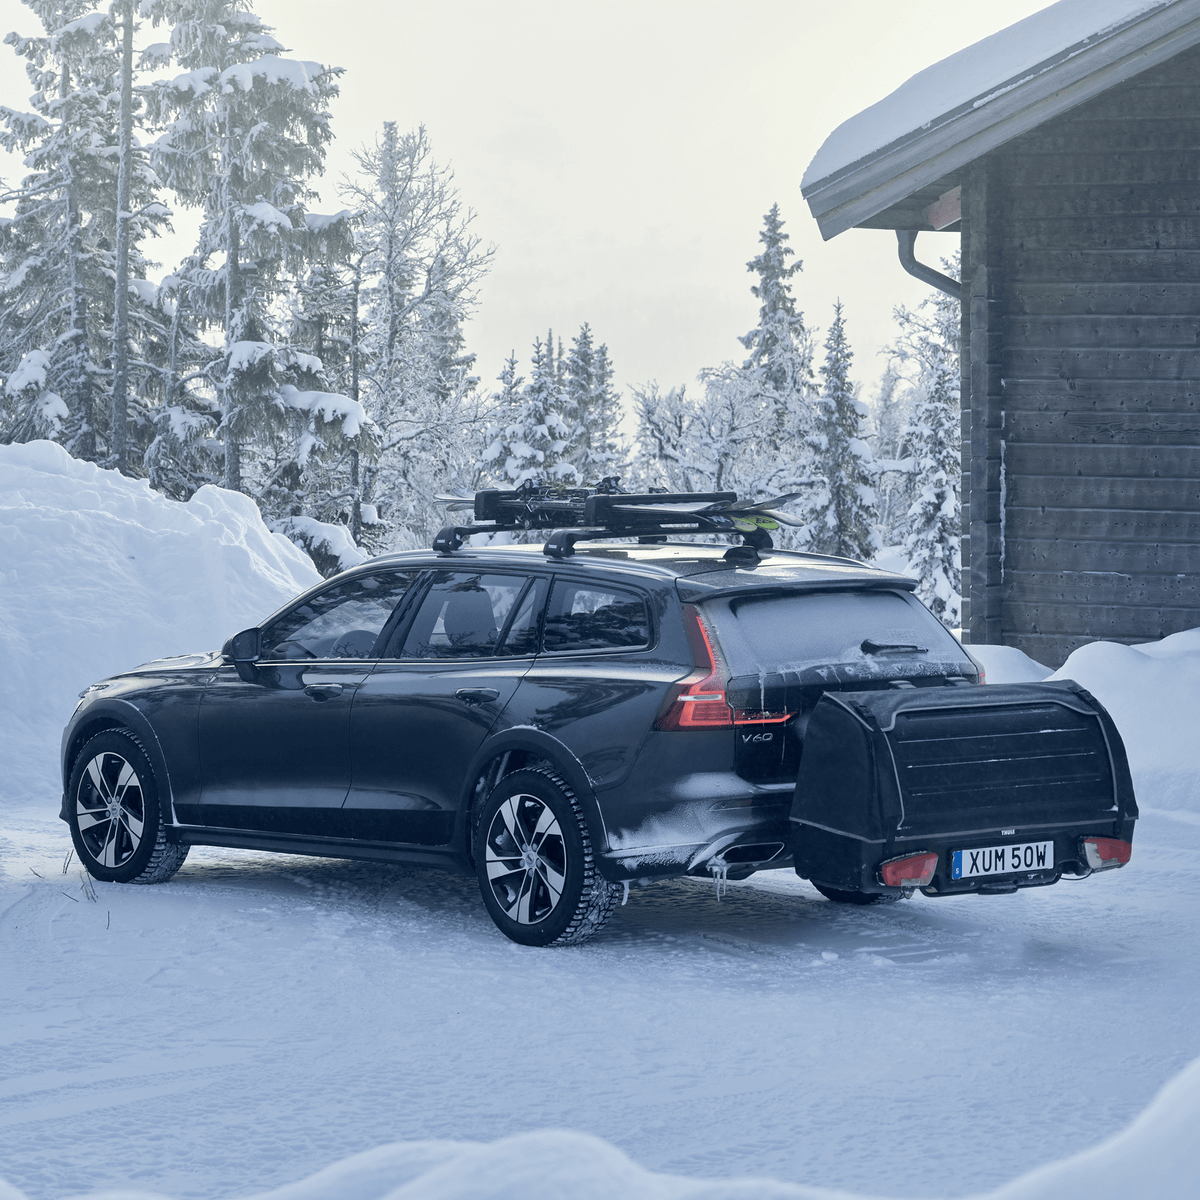 A car parked in a snowy landscape with a Thule Onto cargo box